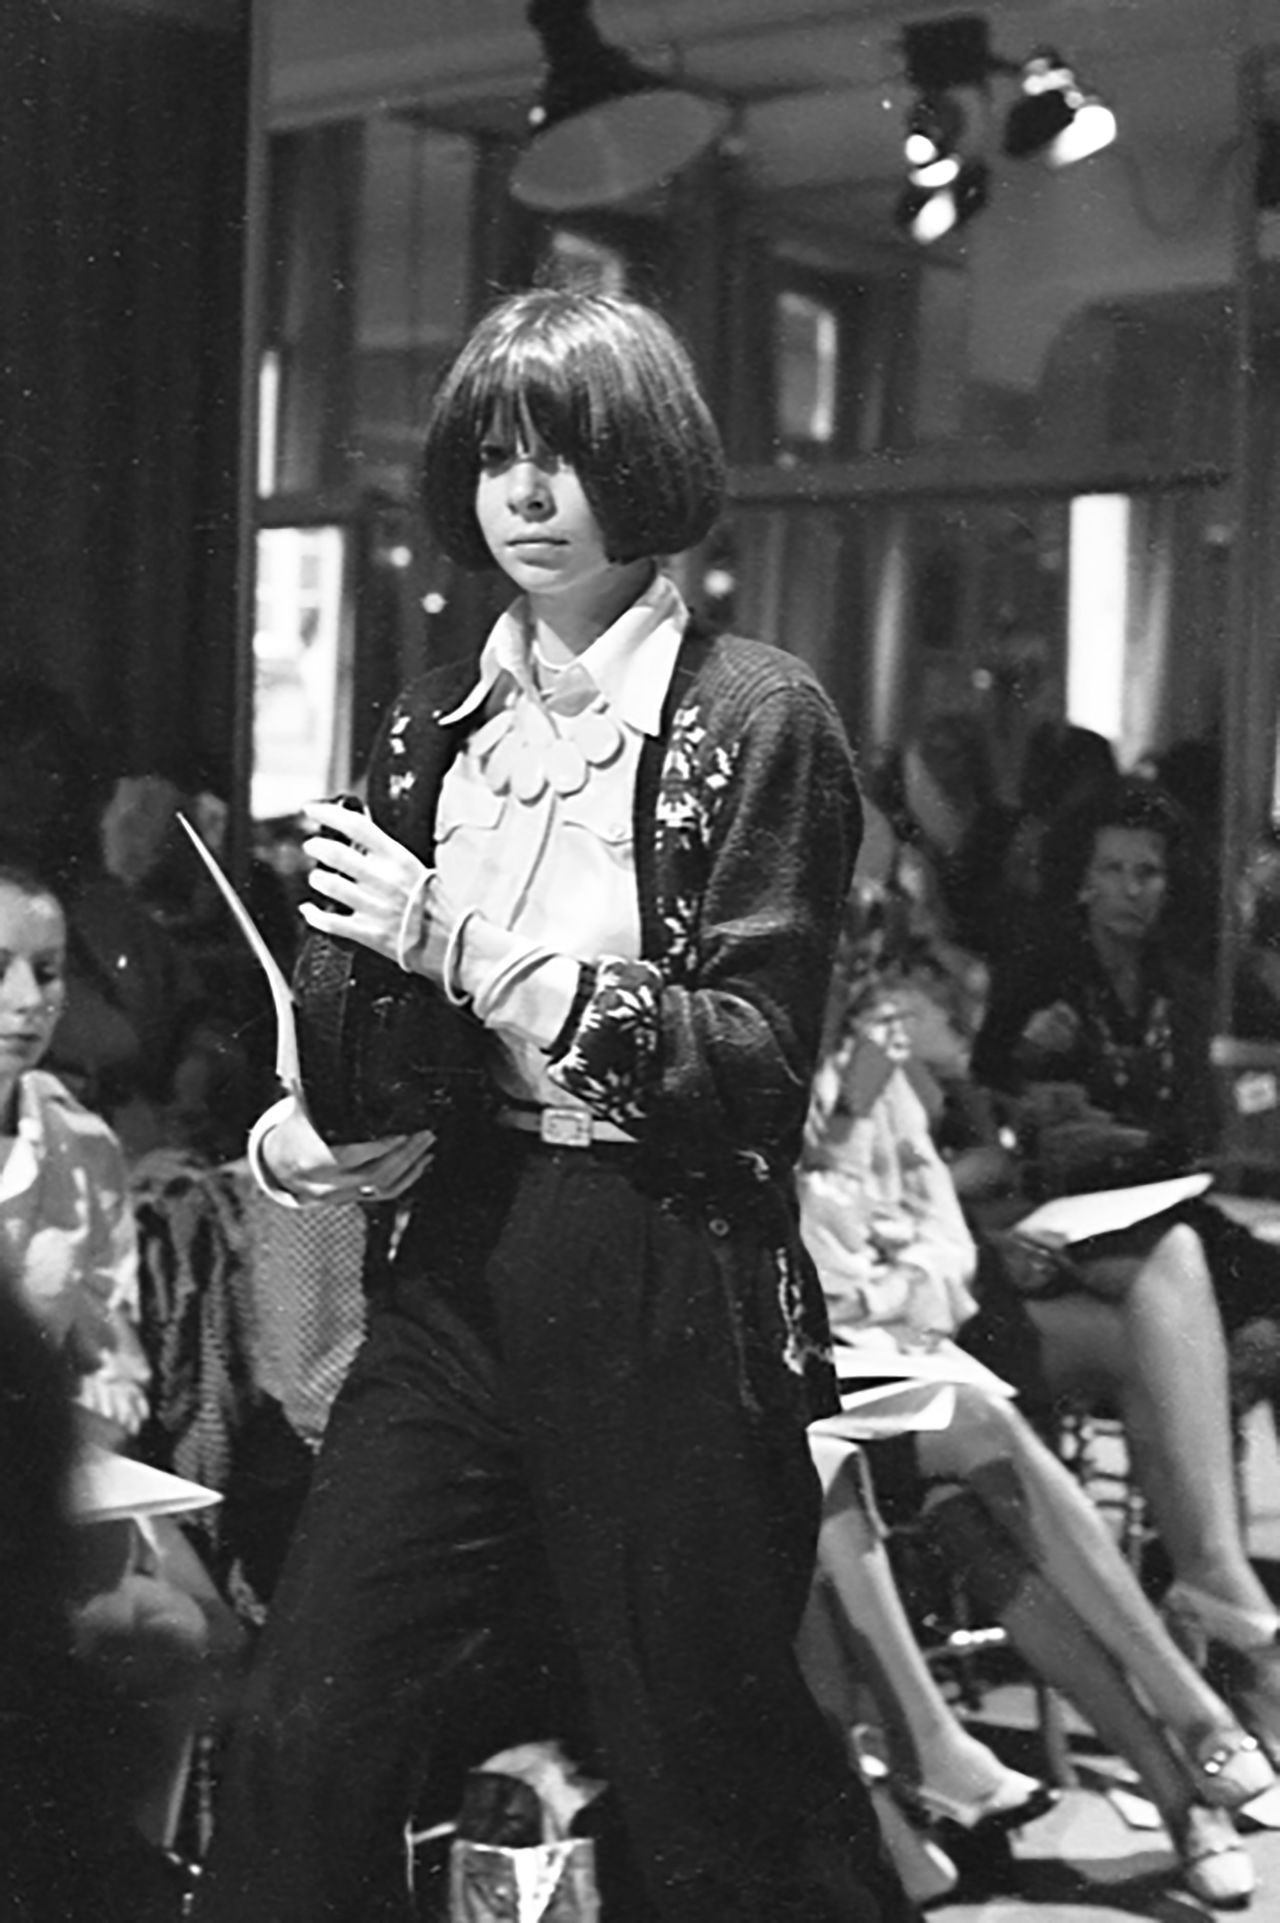 Wintour at a fashion show in the early 1970s.